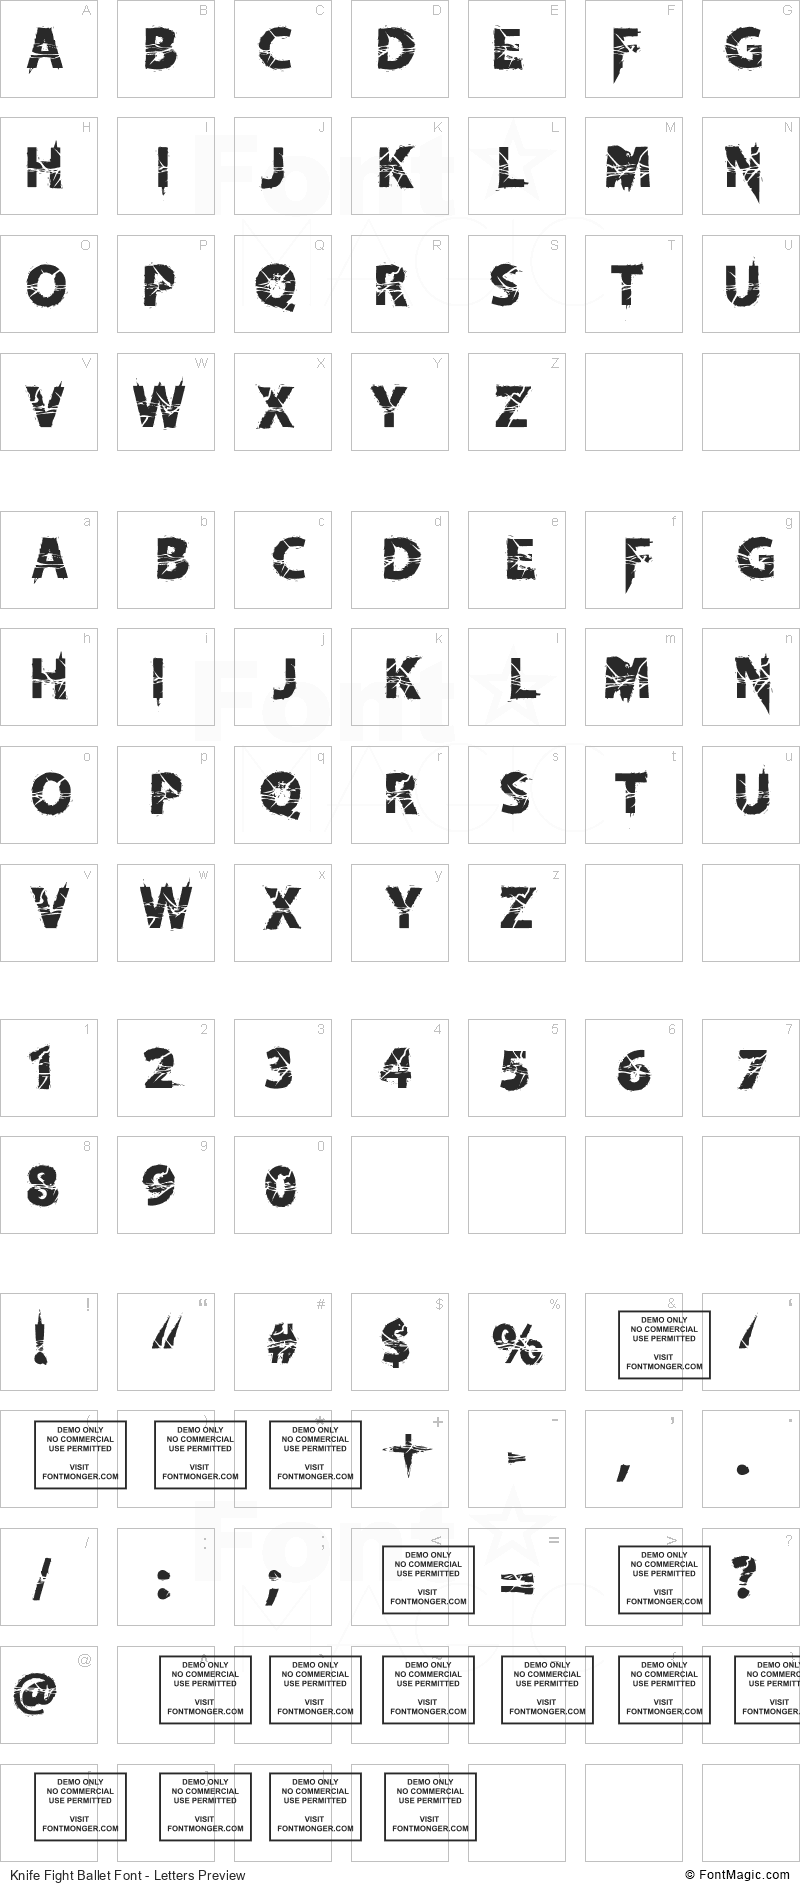 Knife Fight Ballet Font - All Latters Preview Chart